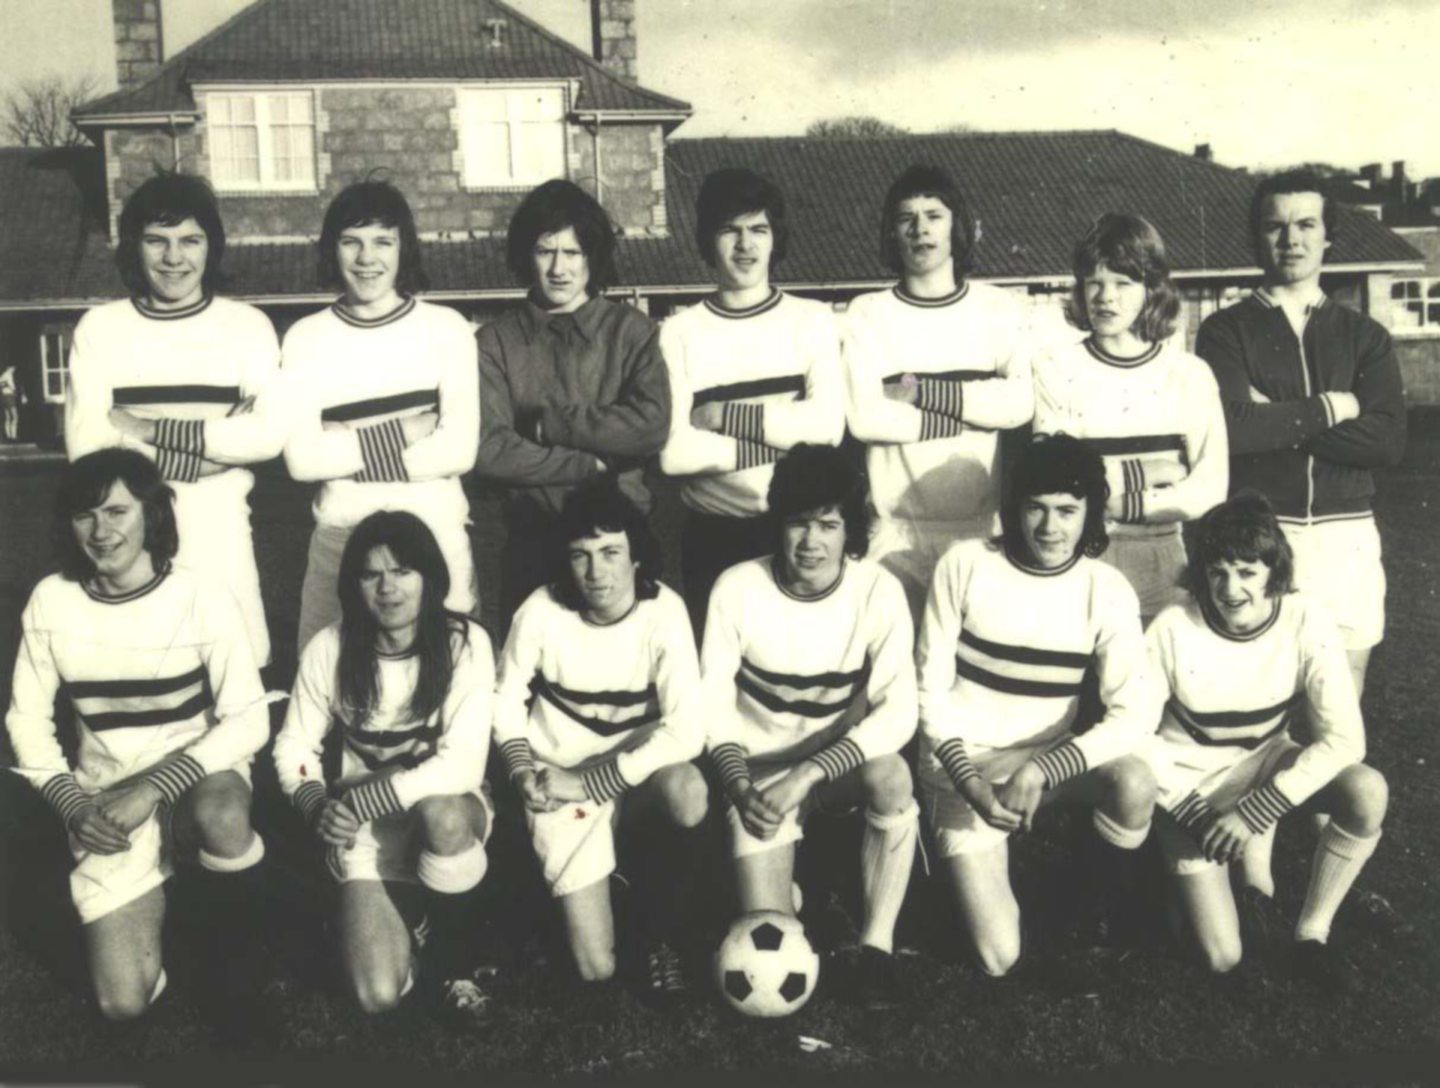 Summerhill Academy 4th year football team pictured during the 1972-73 season. 